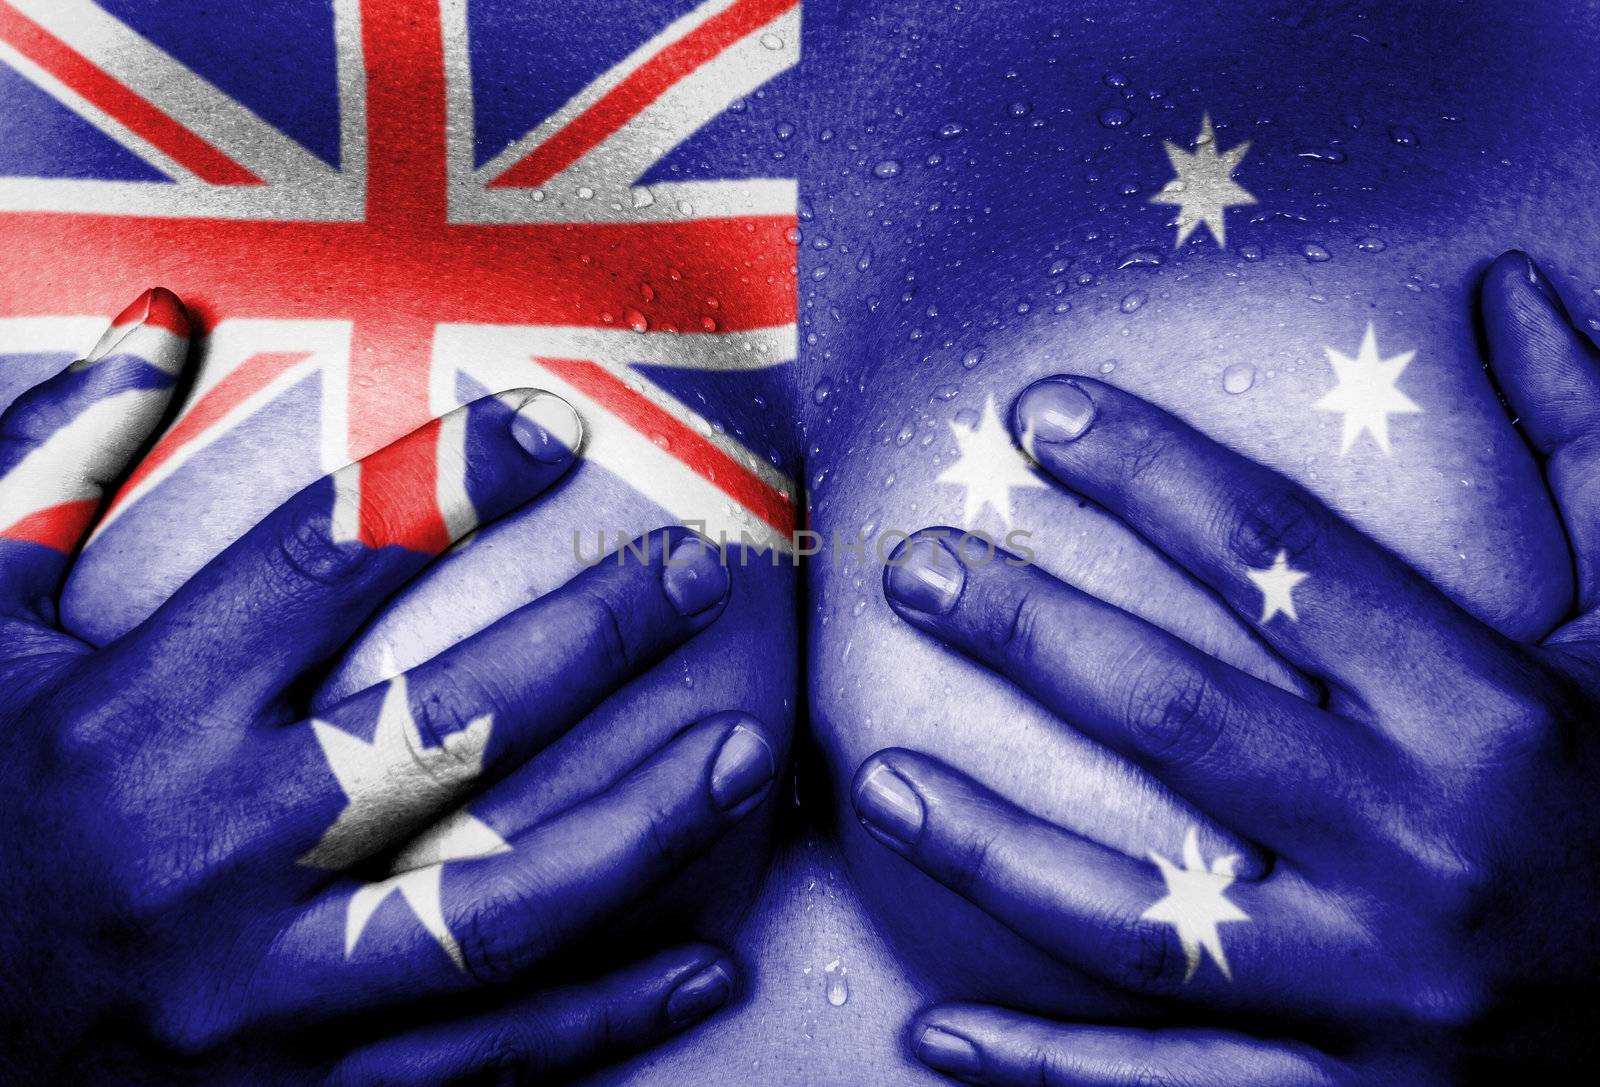 Sweaty upper part of female body, hands covering breasts, flag of Australia